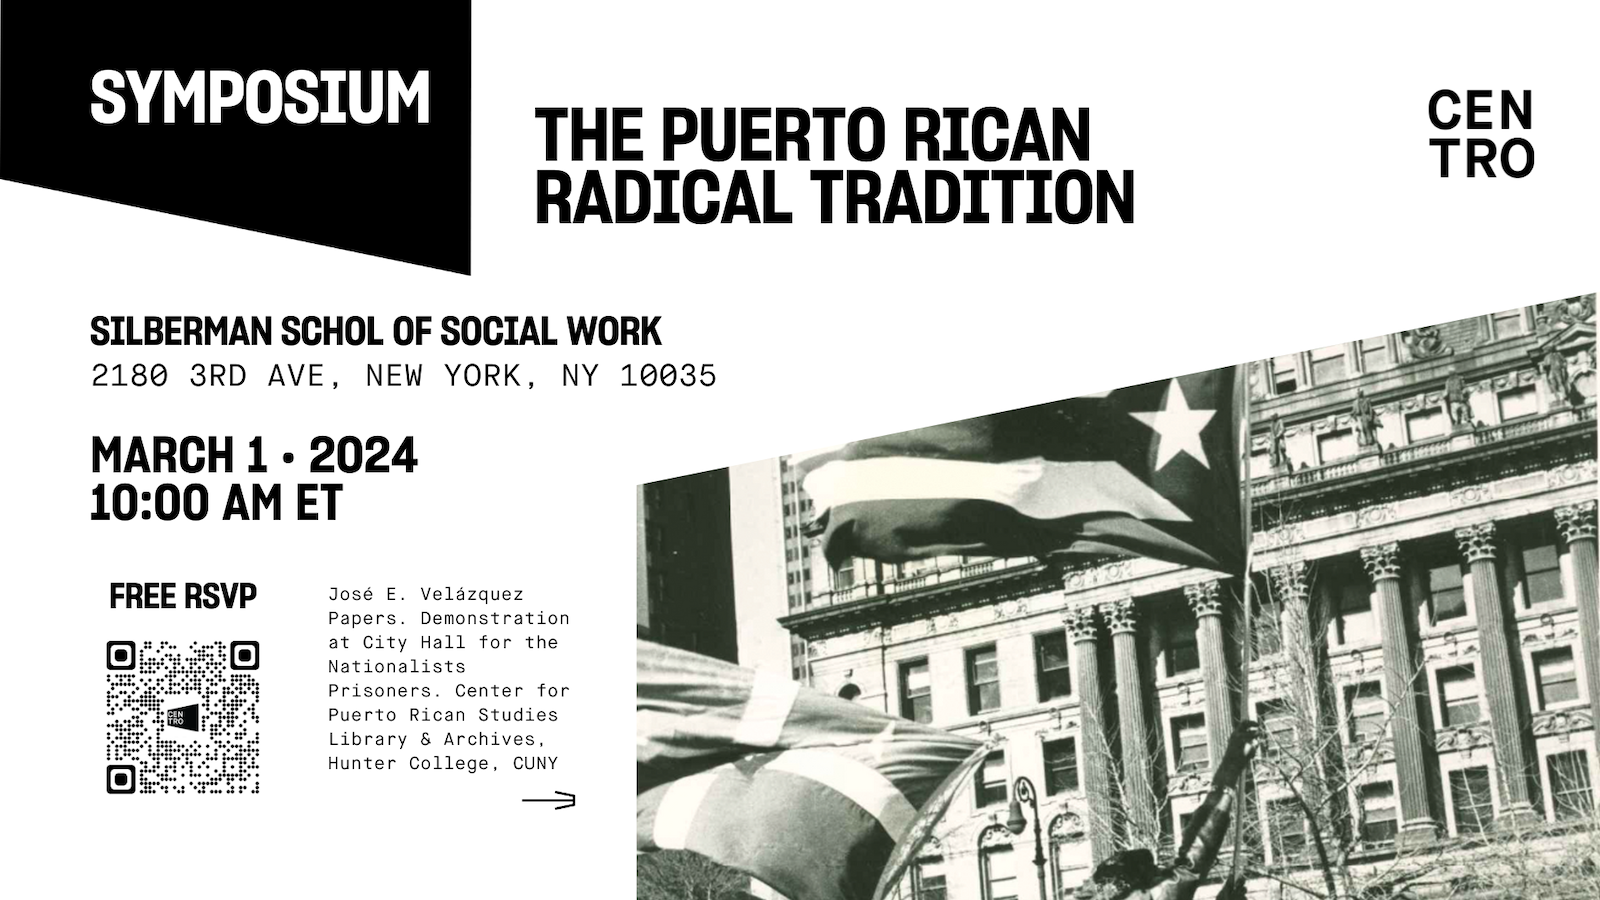 THE PUERTO RICAN RADICAL TRADITION